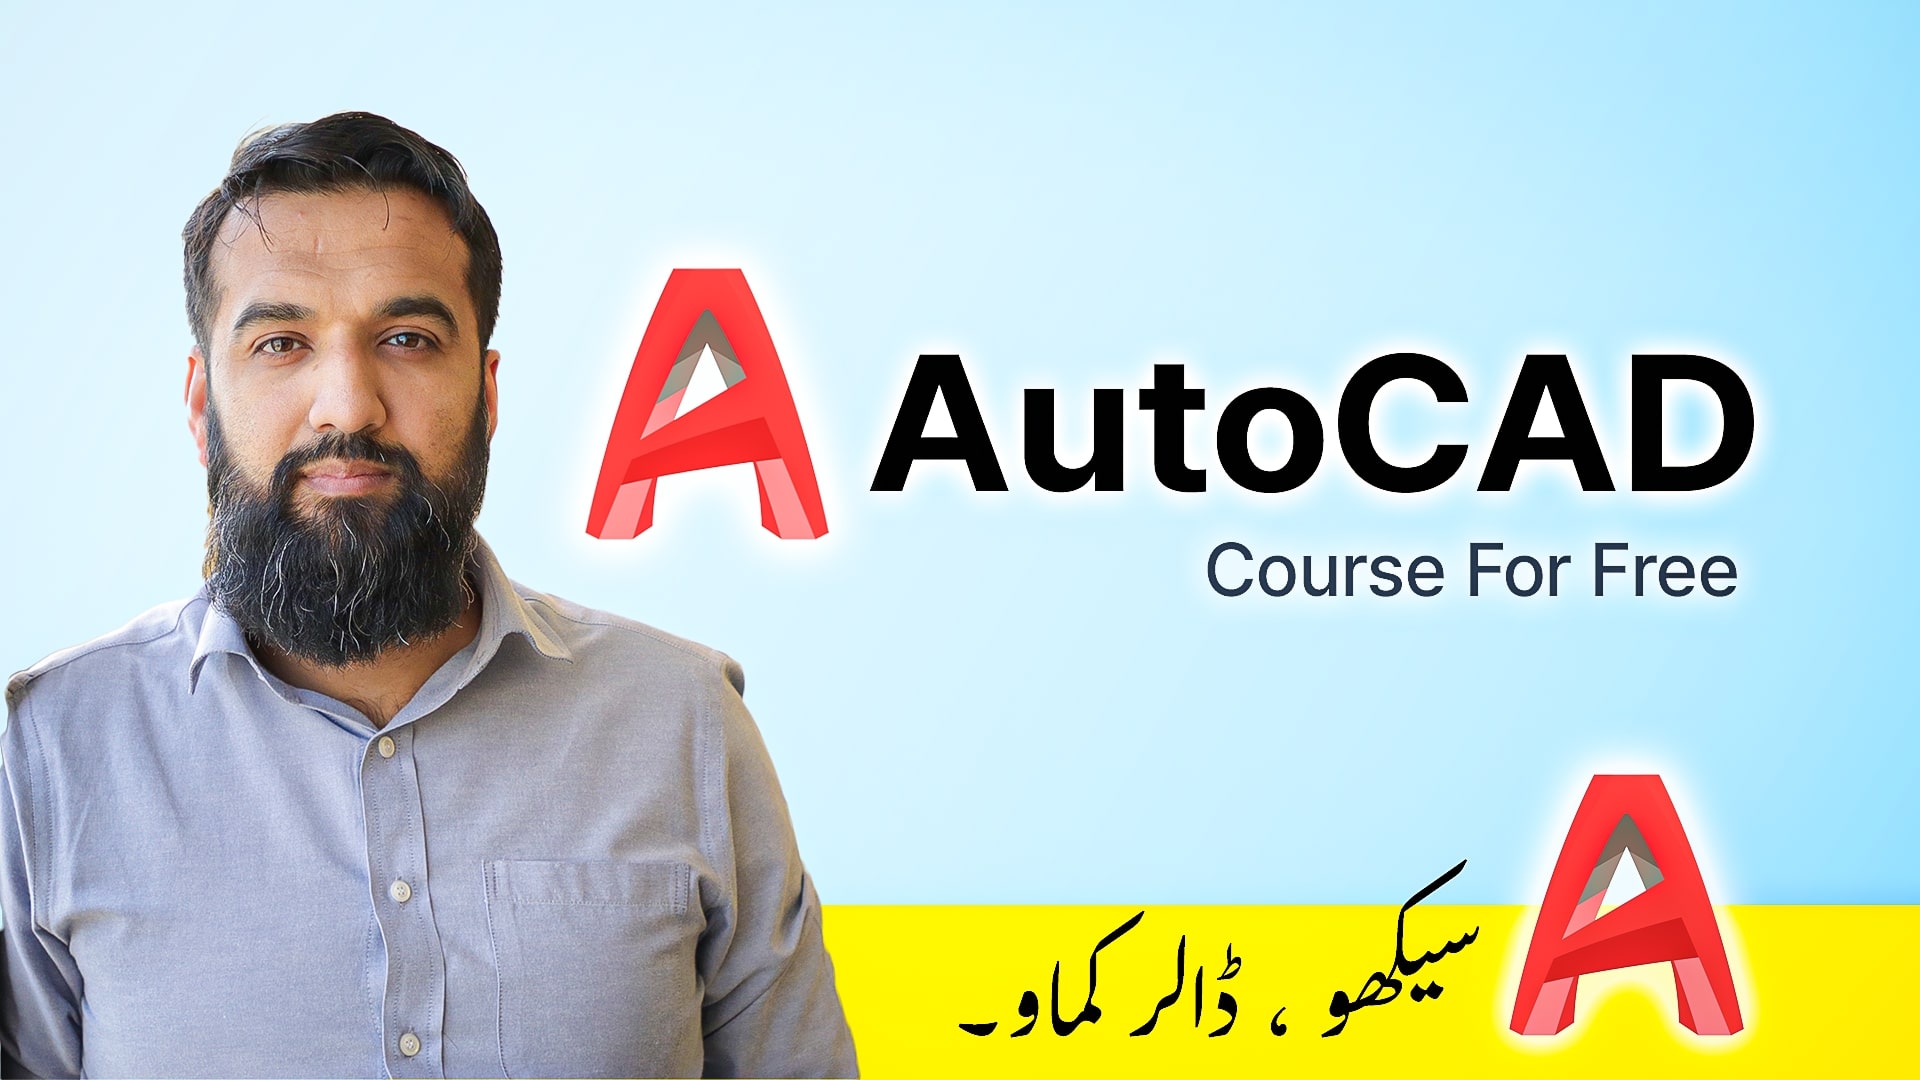  autocad-course-for-beginners-3d-desginers-by-azadchaiwala-64f85b2be6a56987022012.jpg 